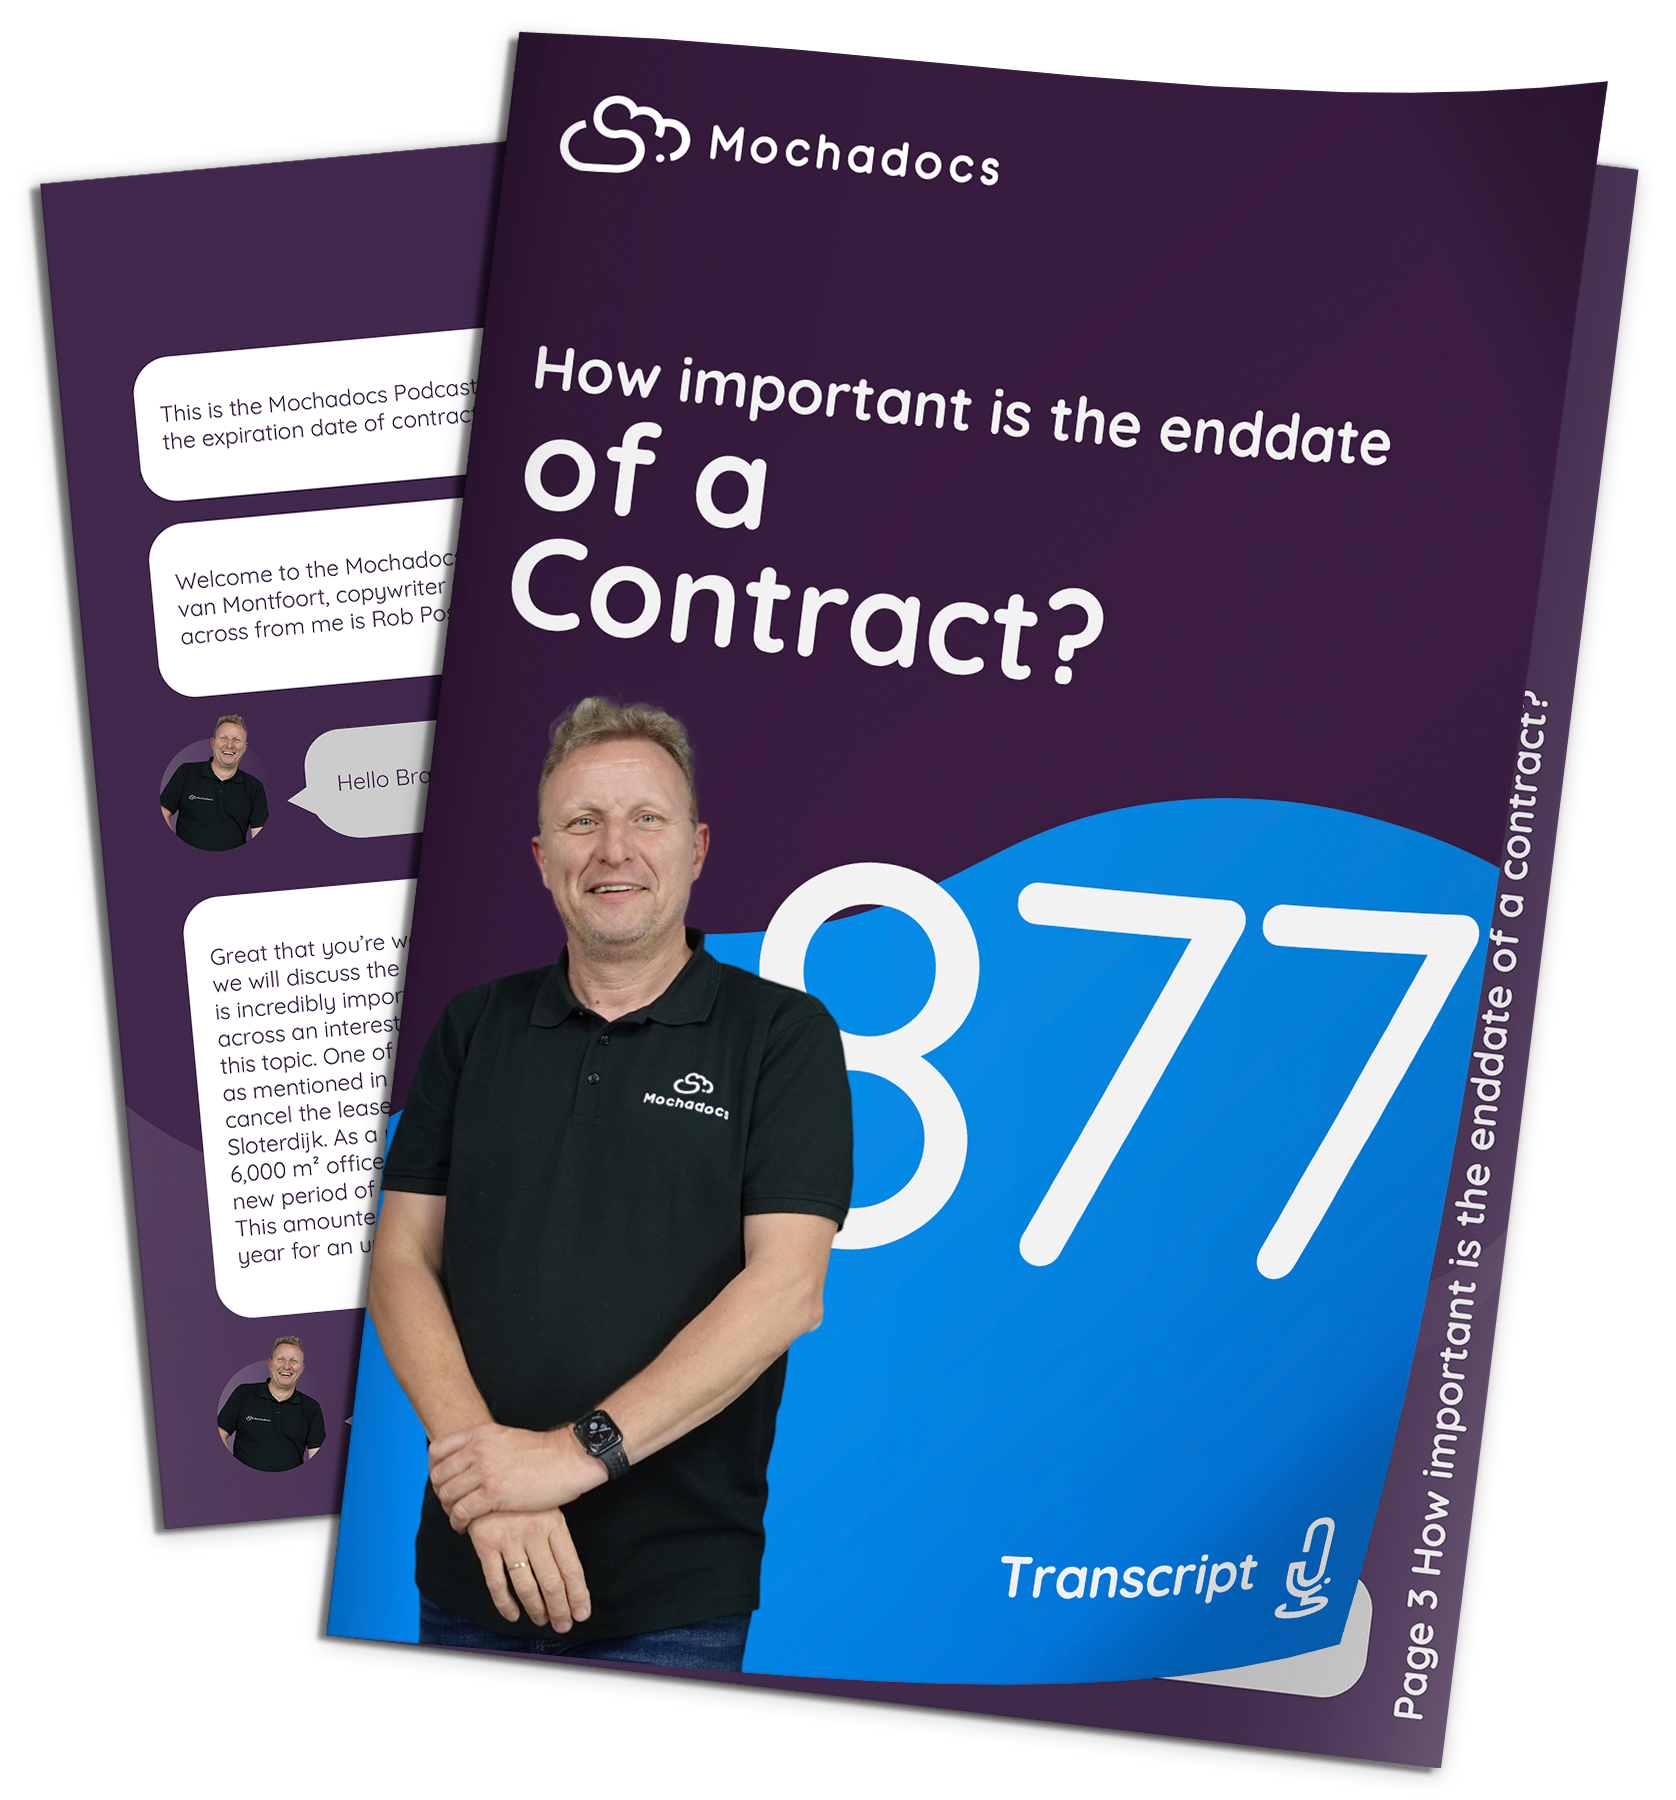 Mochadocs - Contract Management - Transcripts -How important is the enddate of a contract